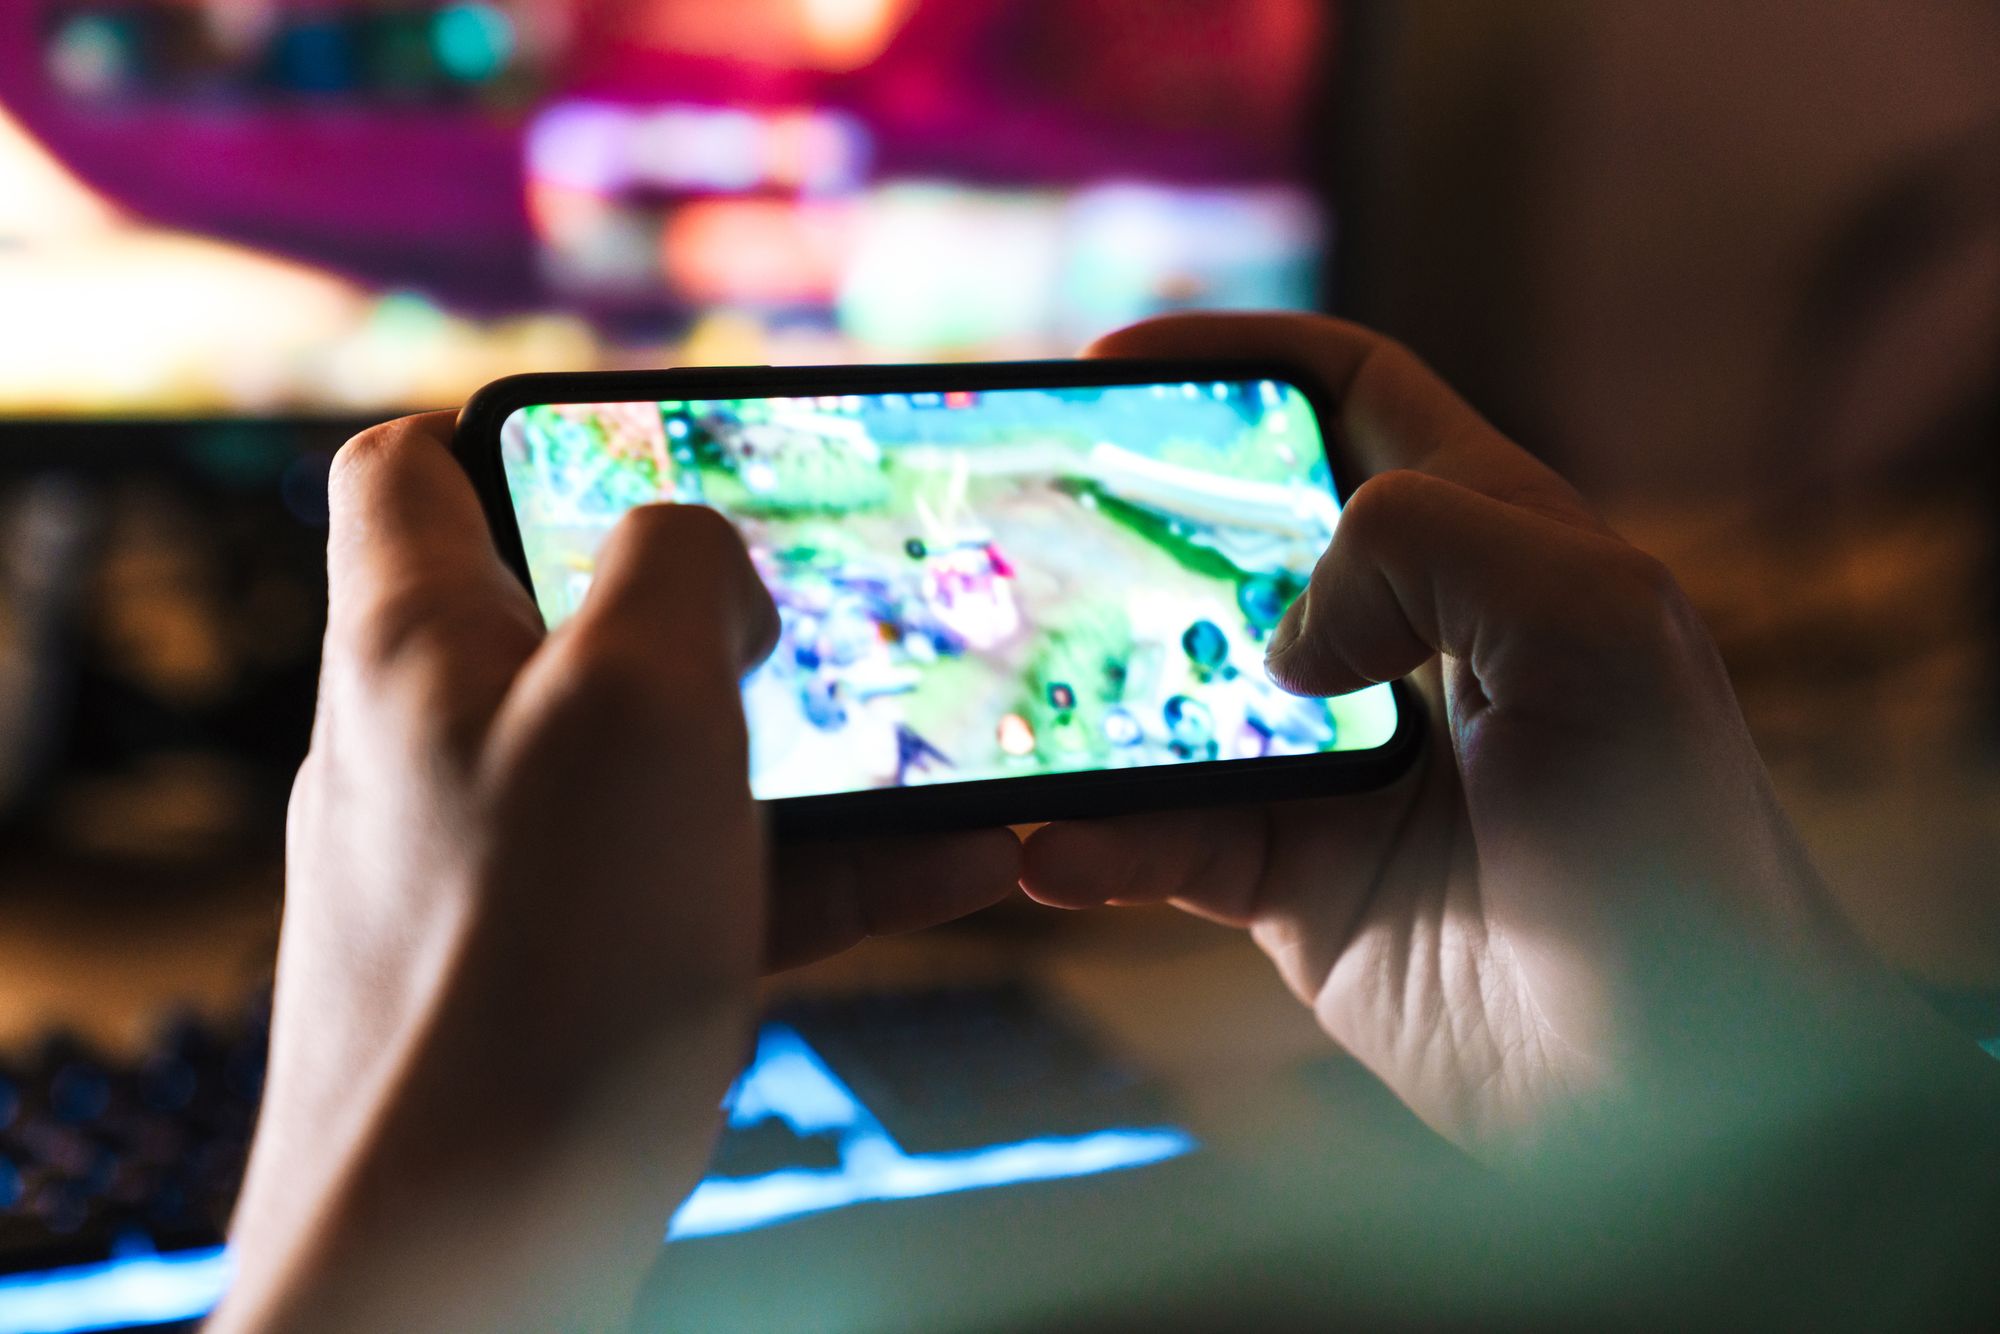 What's next for mobile games?